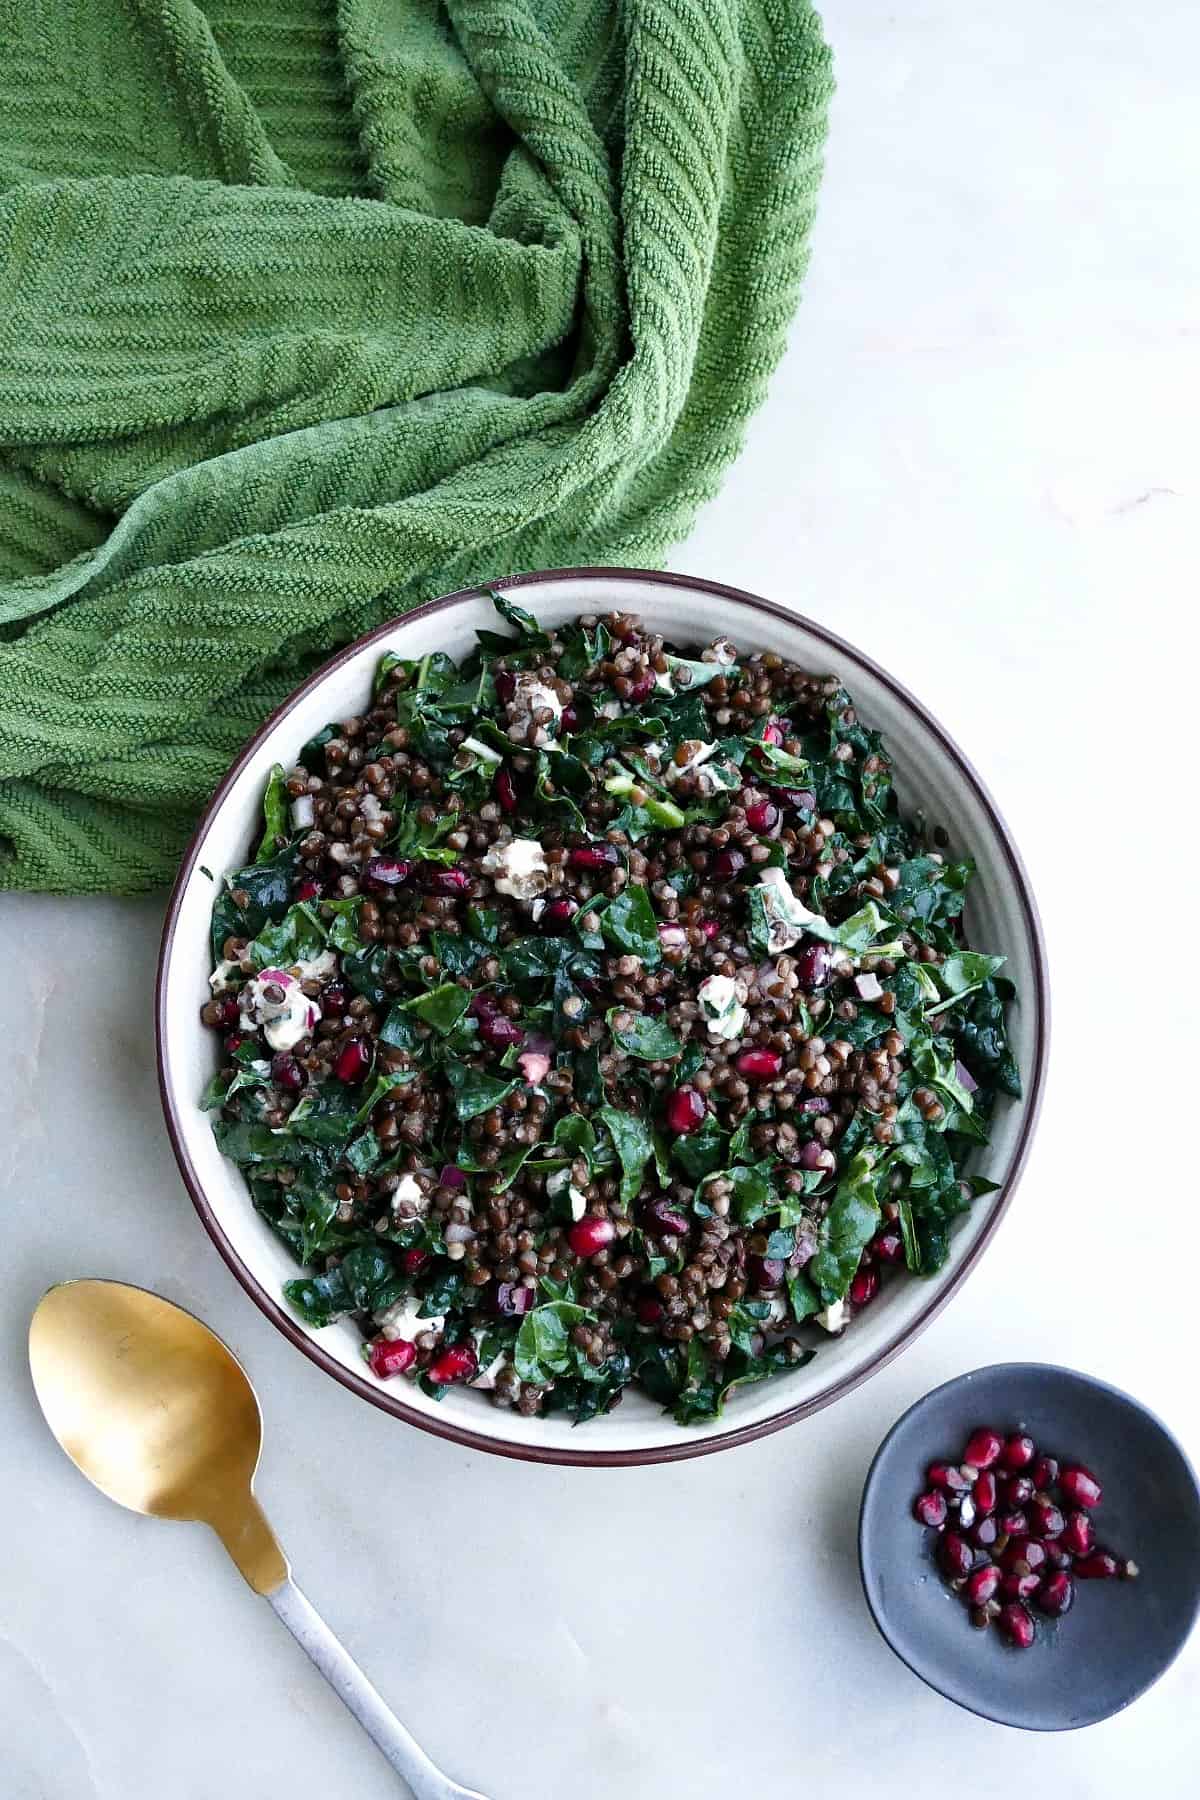 black lentil and kale salad in a serving bowl next to a napkin and spoon